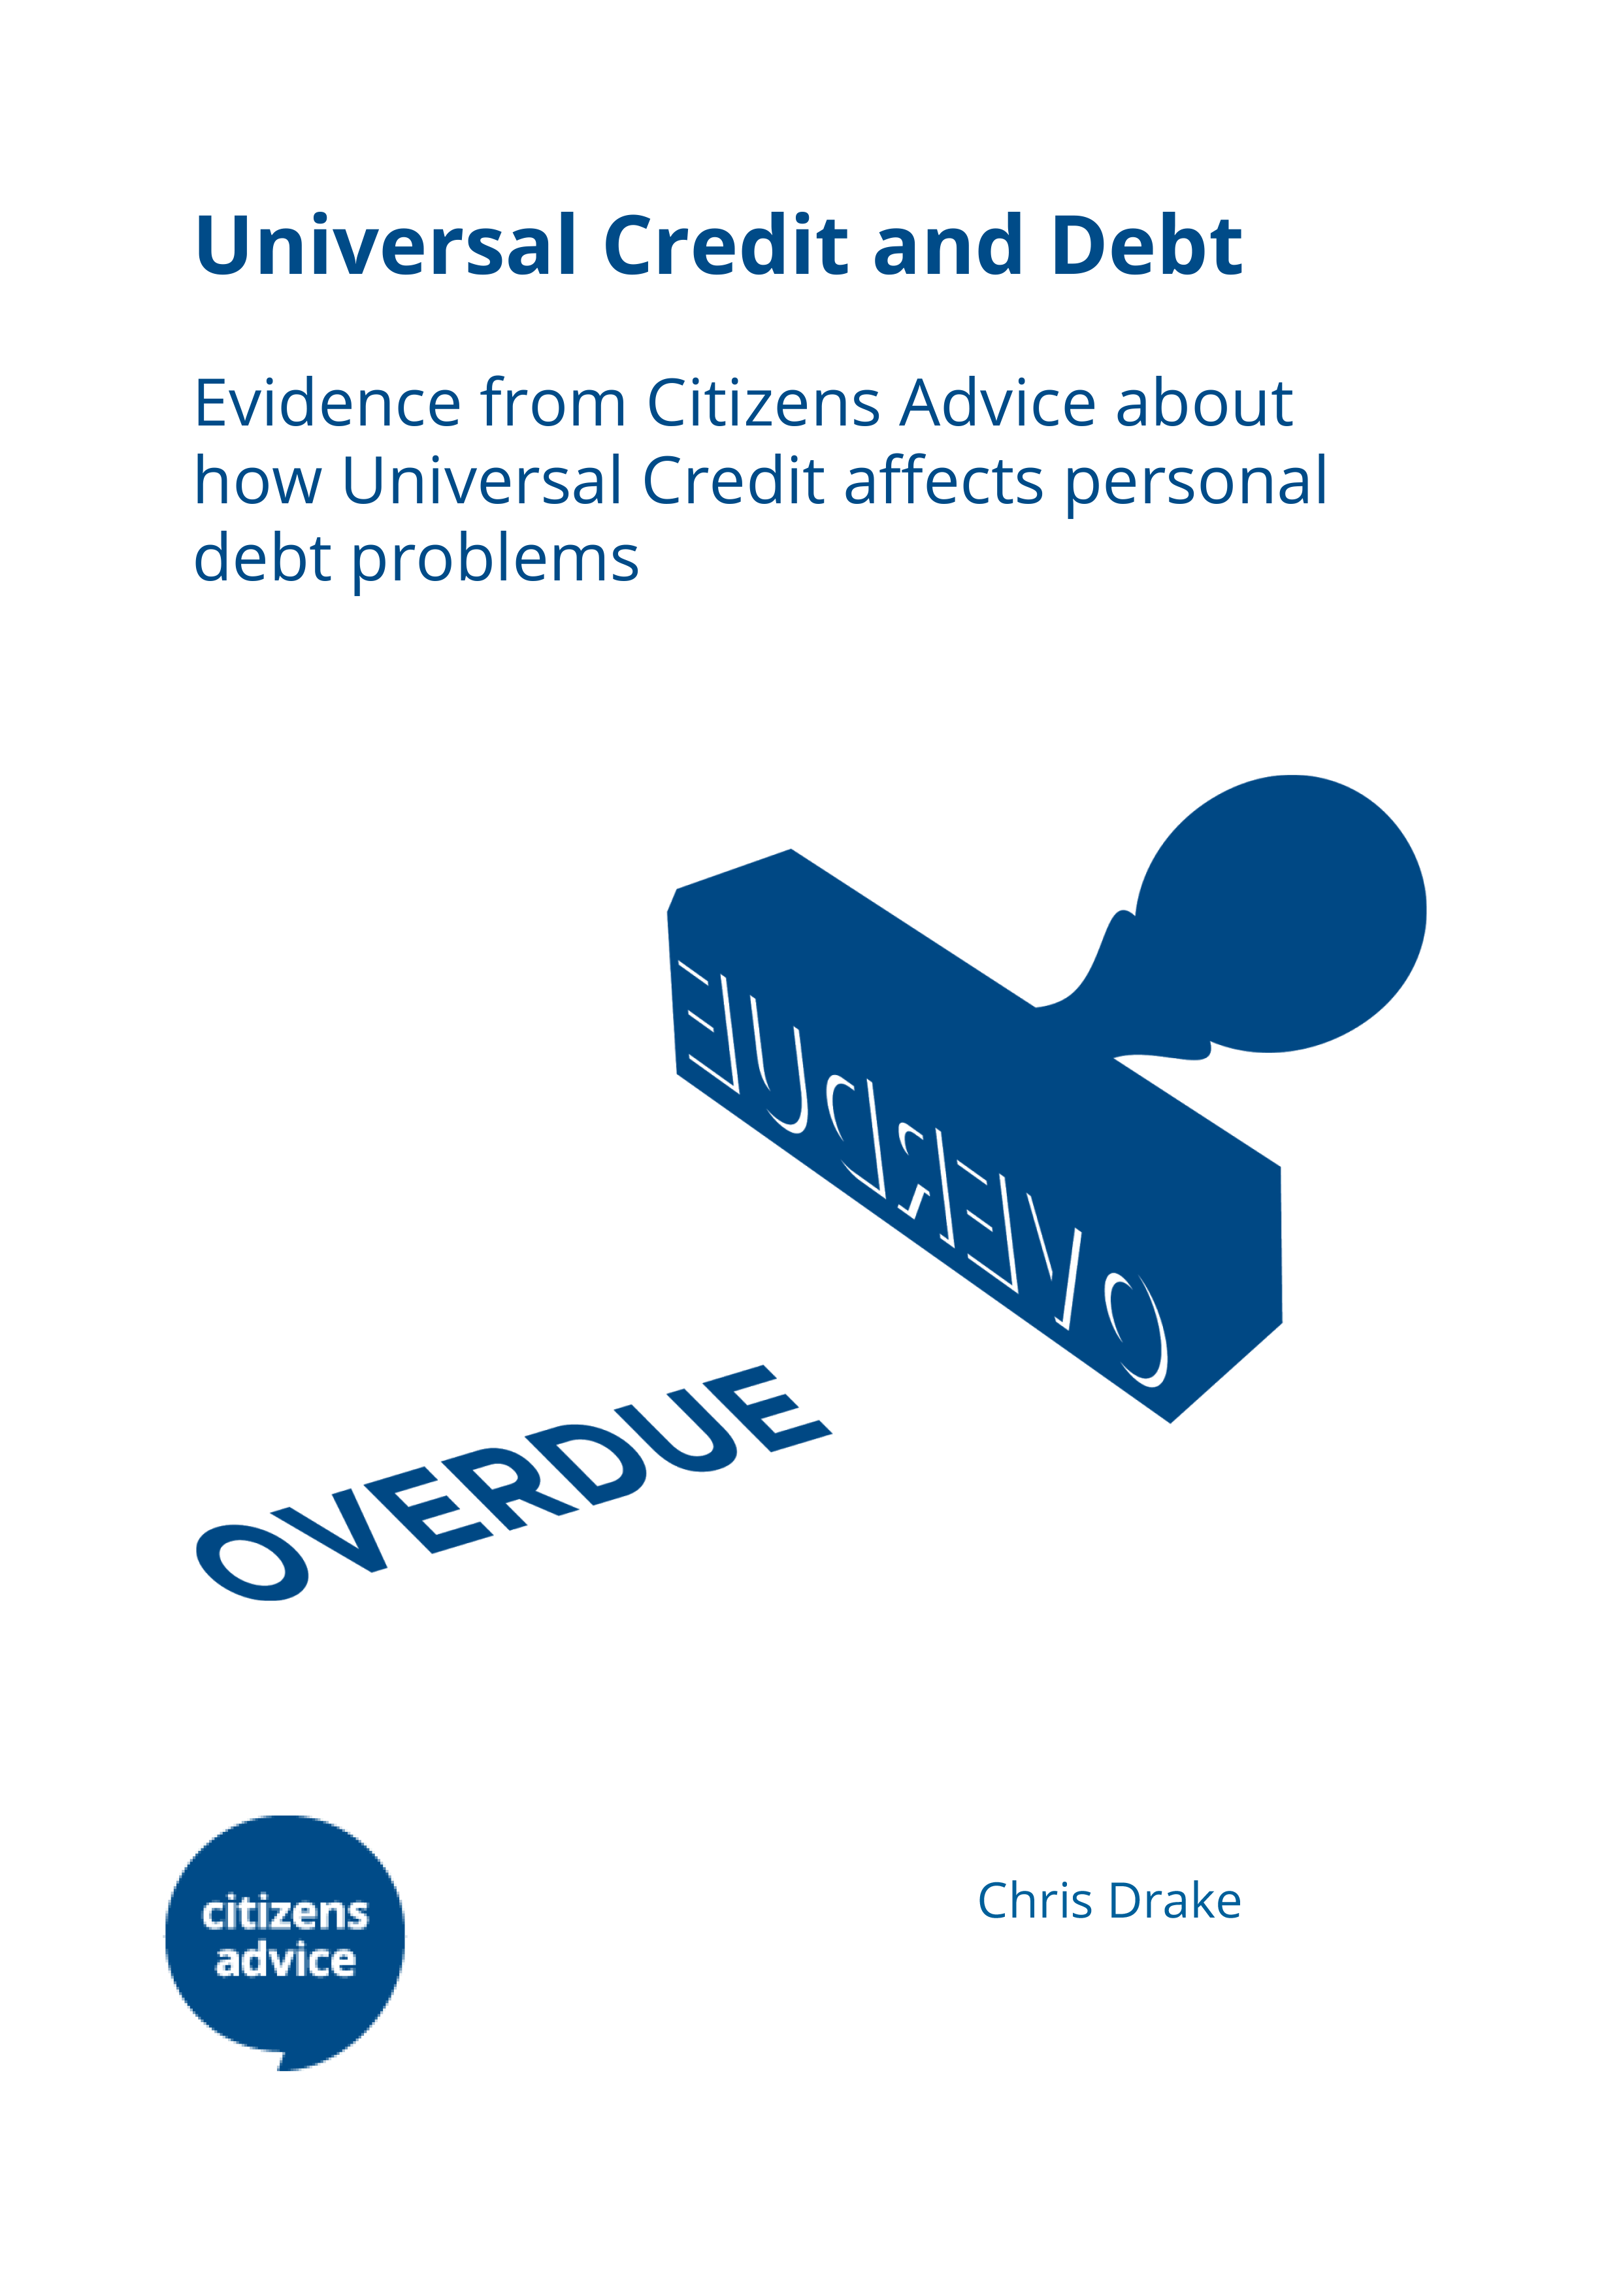 Universal Credit and debt Citizens Advice